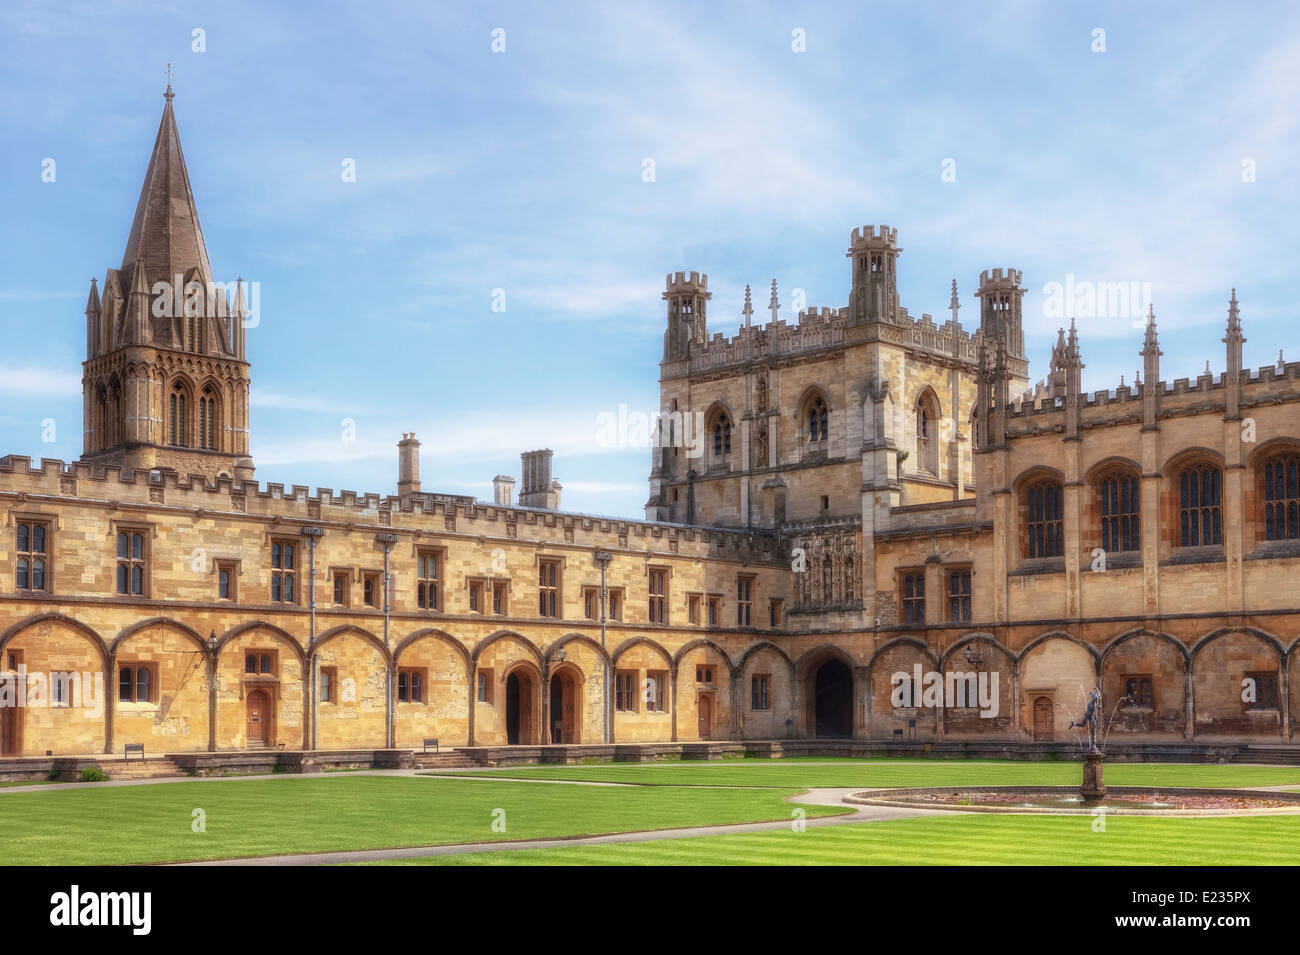 Christ Church College, Oxford, Oxfordshire, Angleterre, Royaume-Uni Banque D'Images